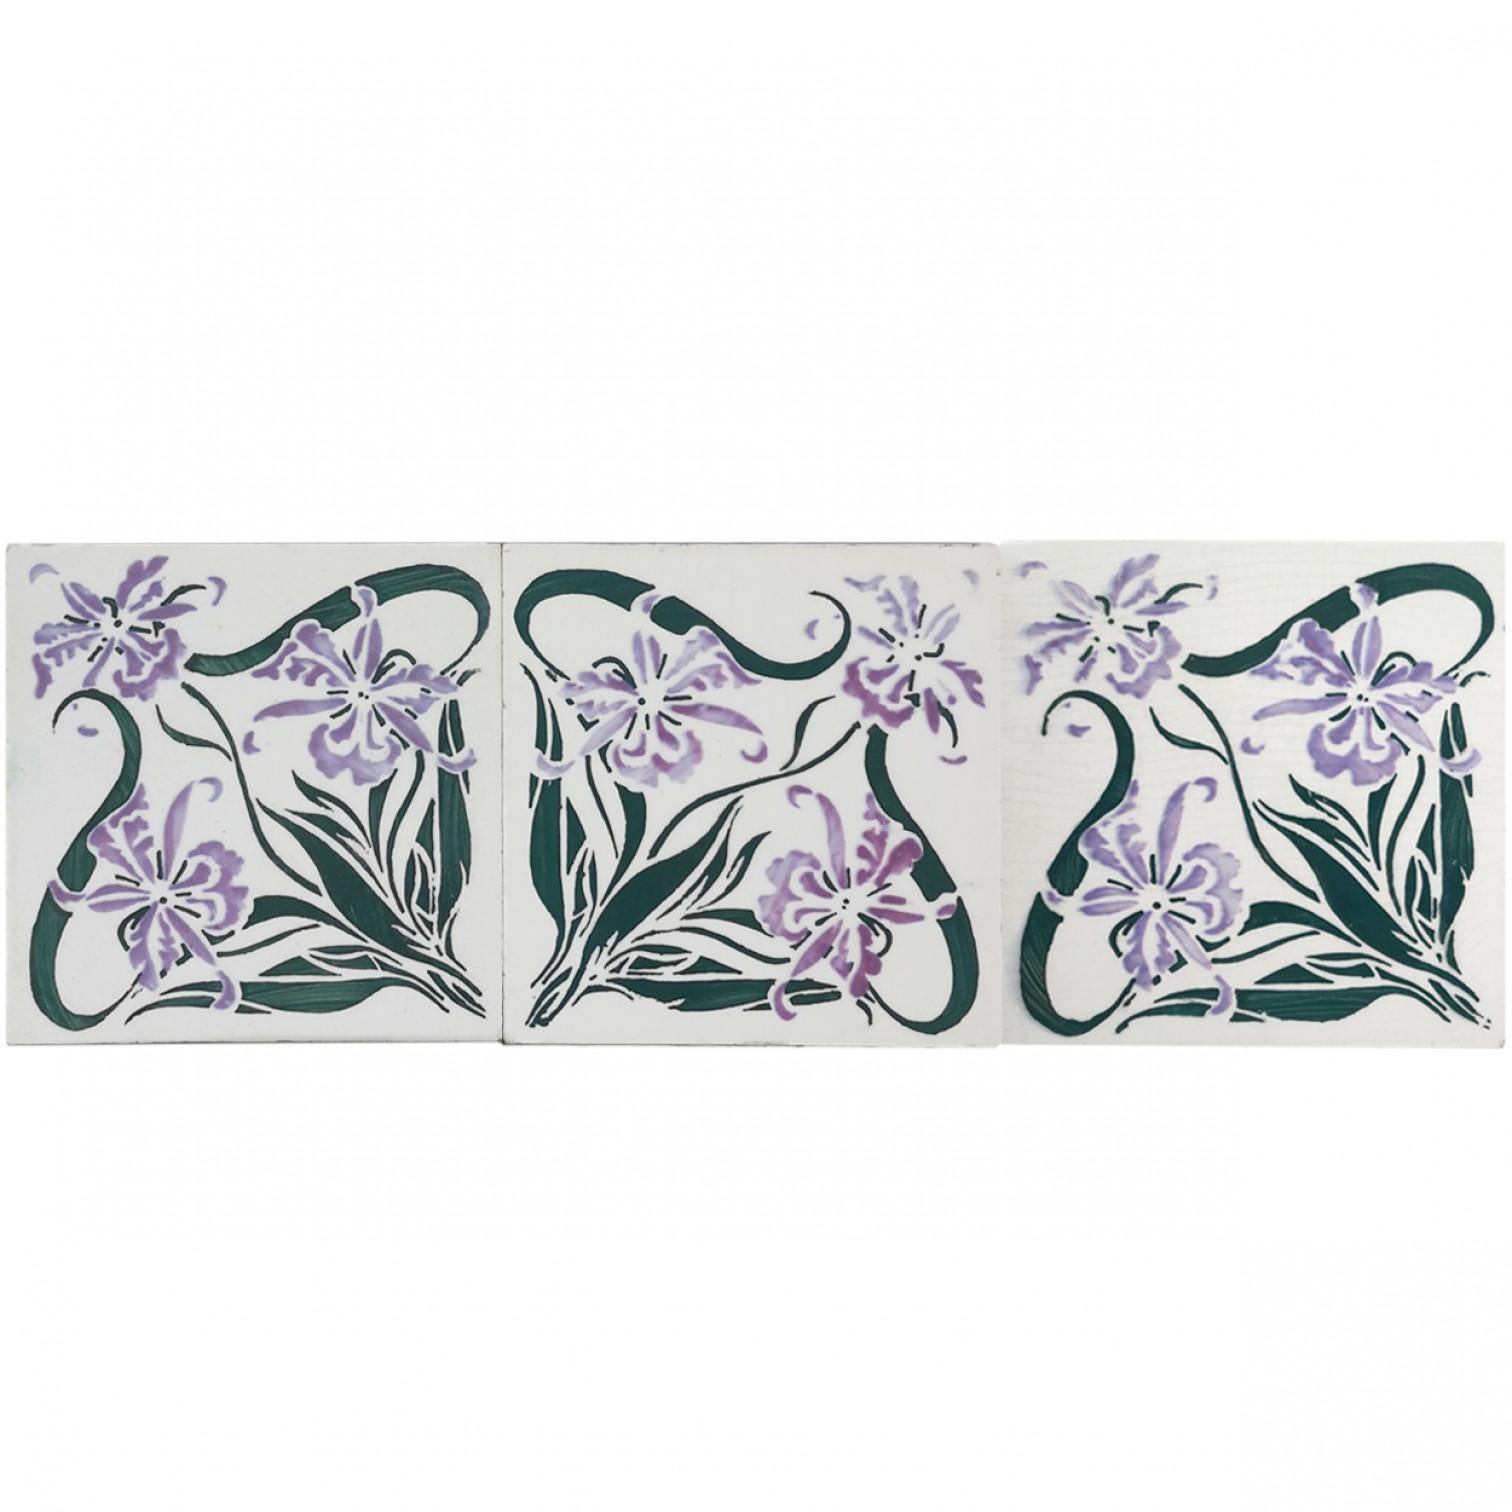 1 of the 40 amazing set handmade tiles in rich dark green, lilac/purple colors. Manufactured around 1920 by Marque de Fabrique CF, Devres, France
These tiles would be charming displayed on easels, framed or incorporated into a custom tile